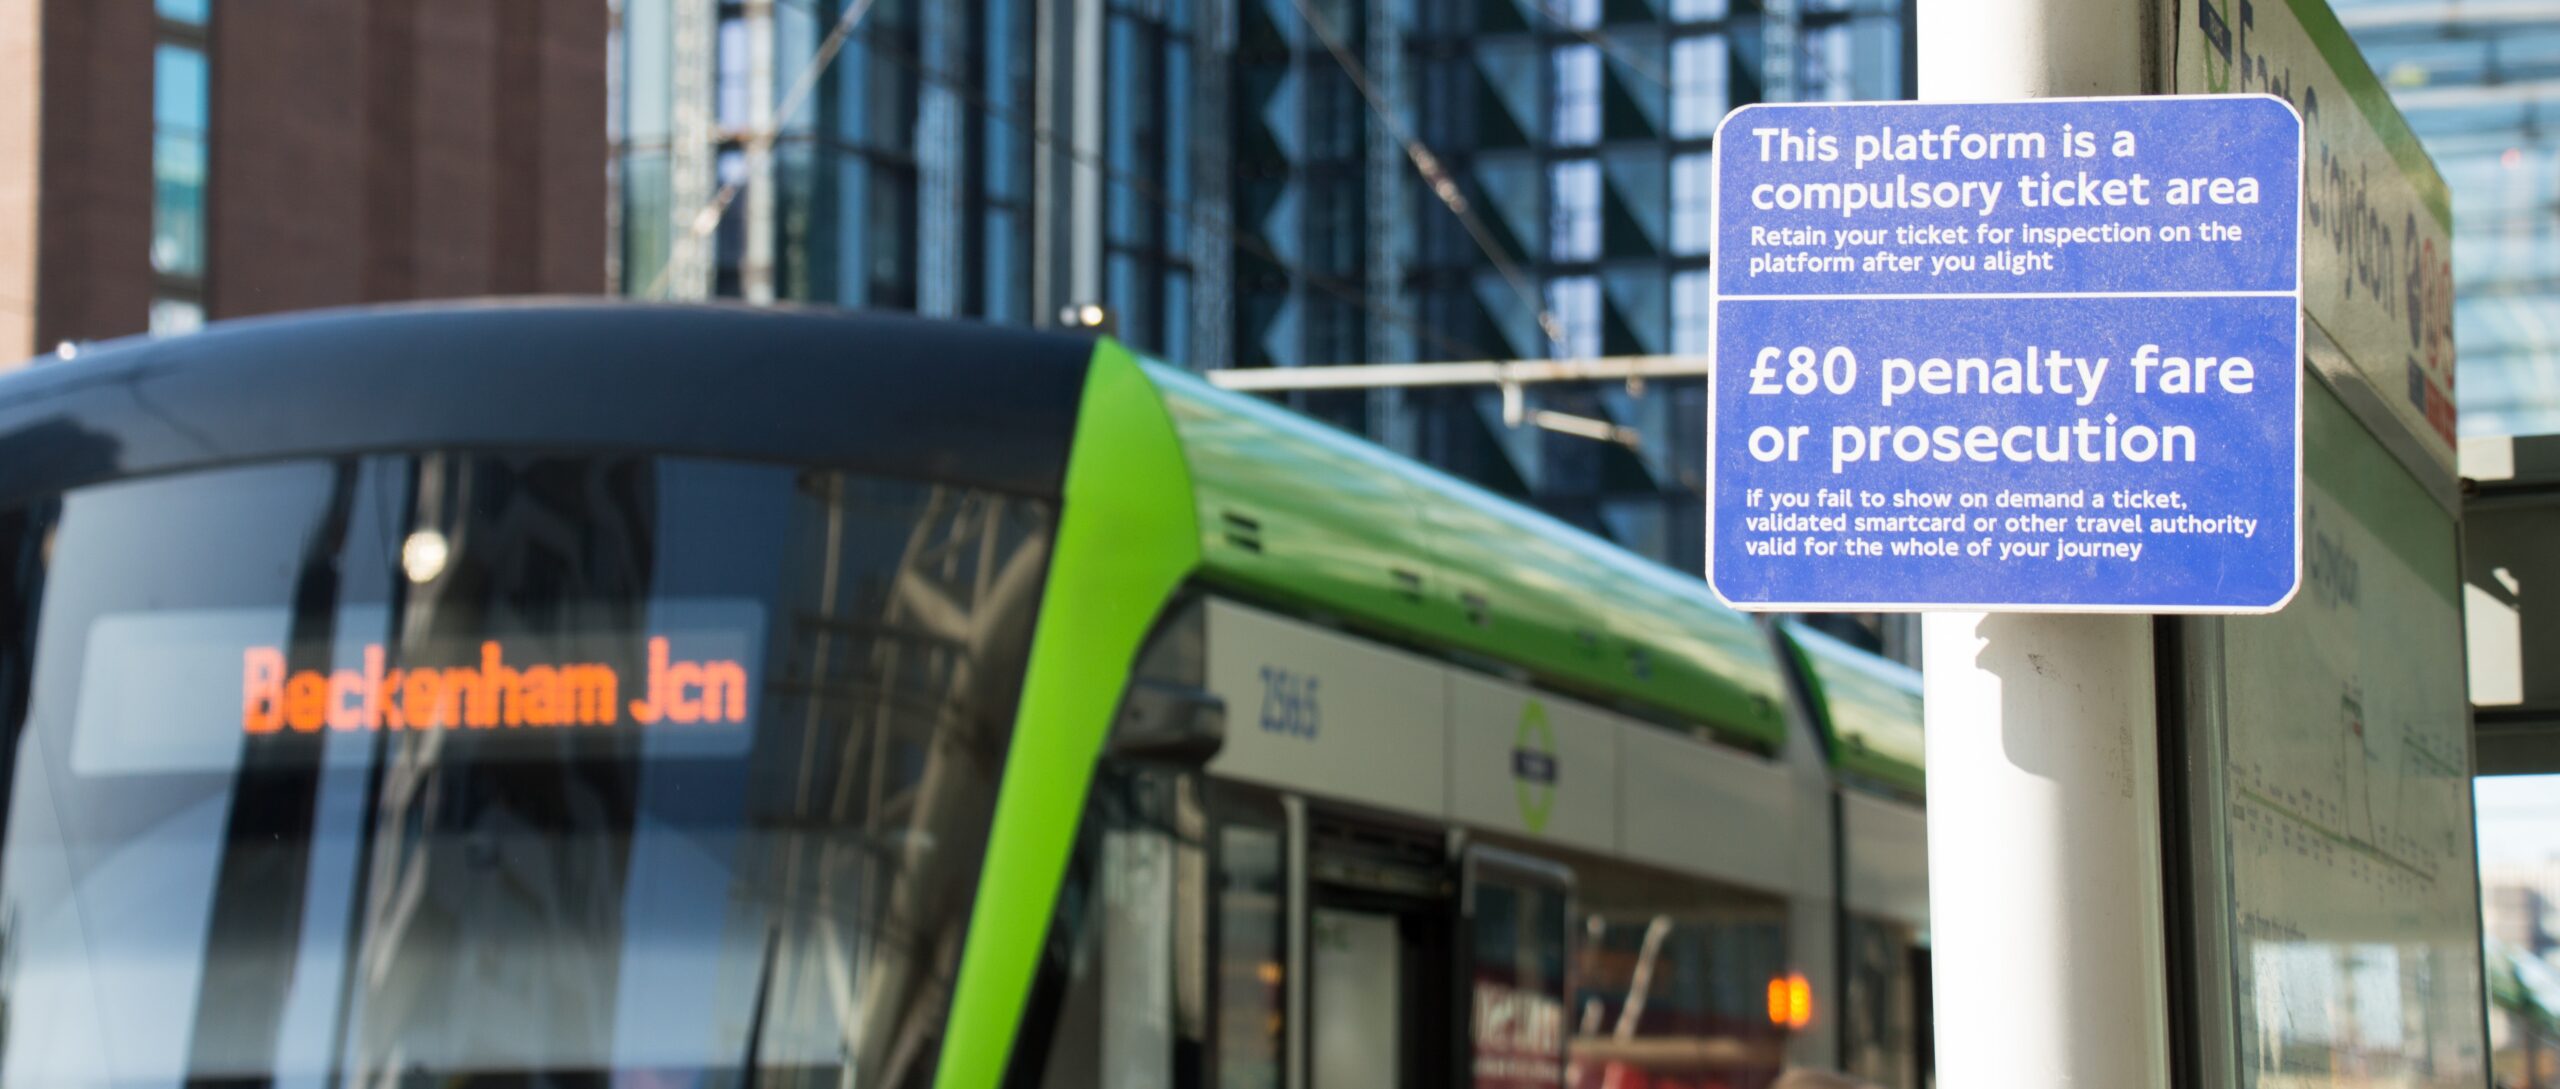 Penalty fare sign at East Croydon tram station